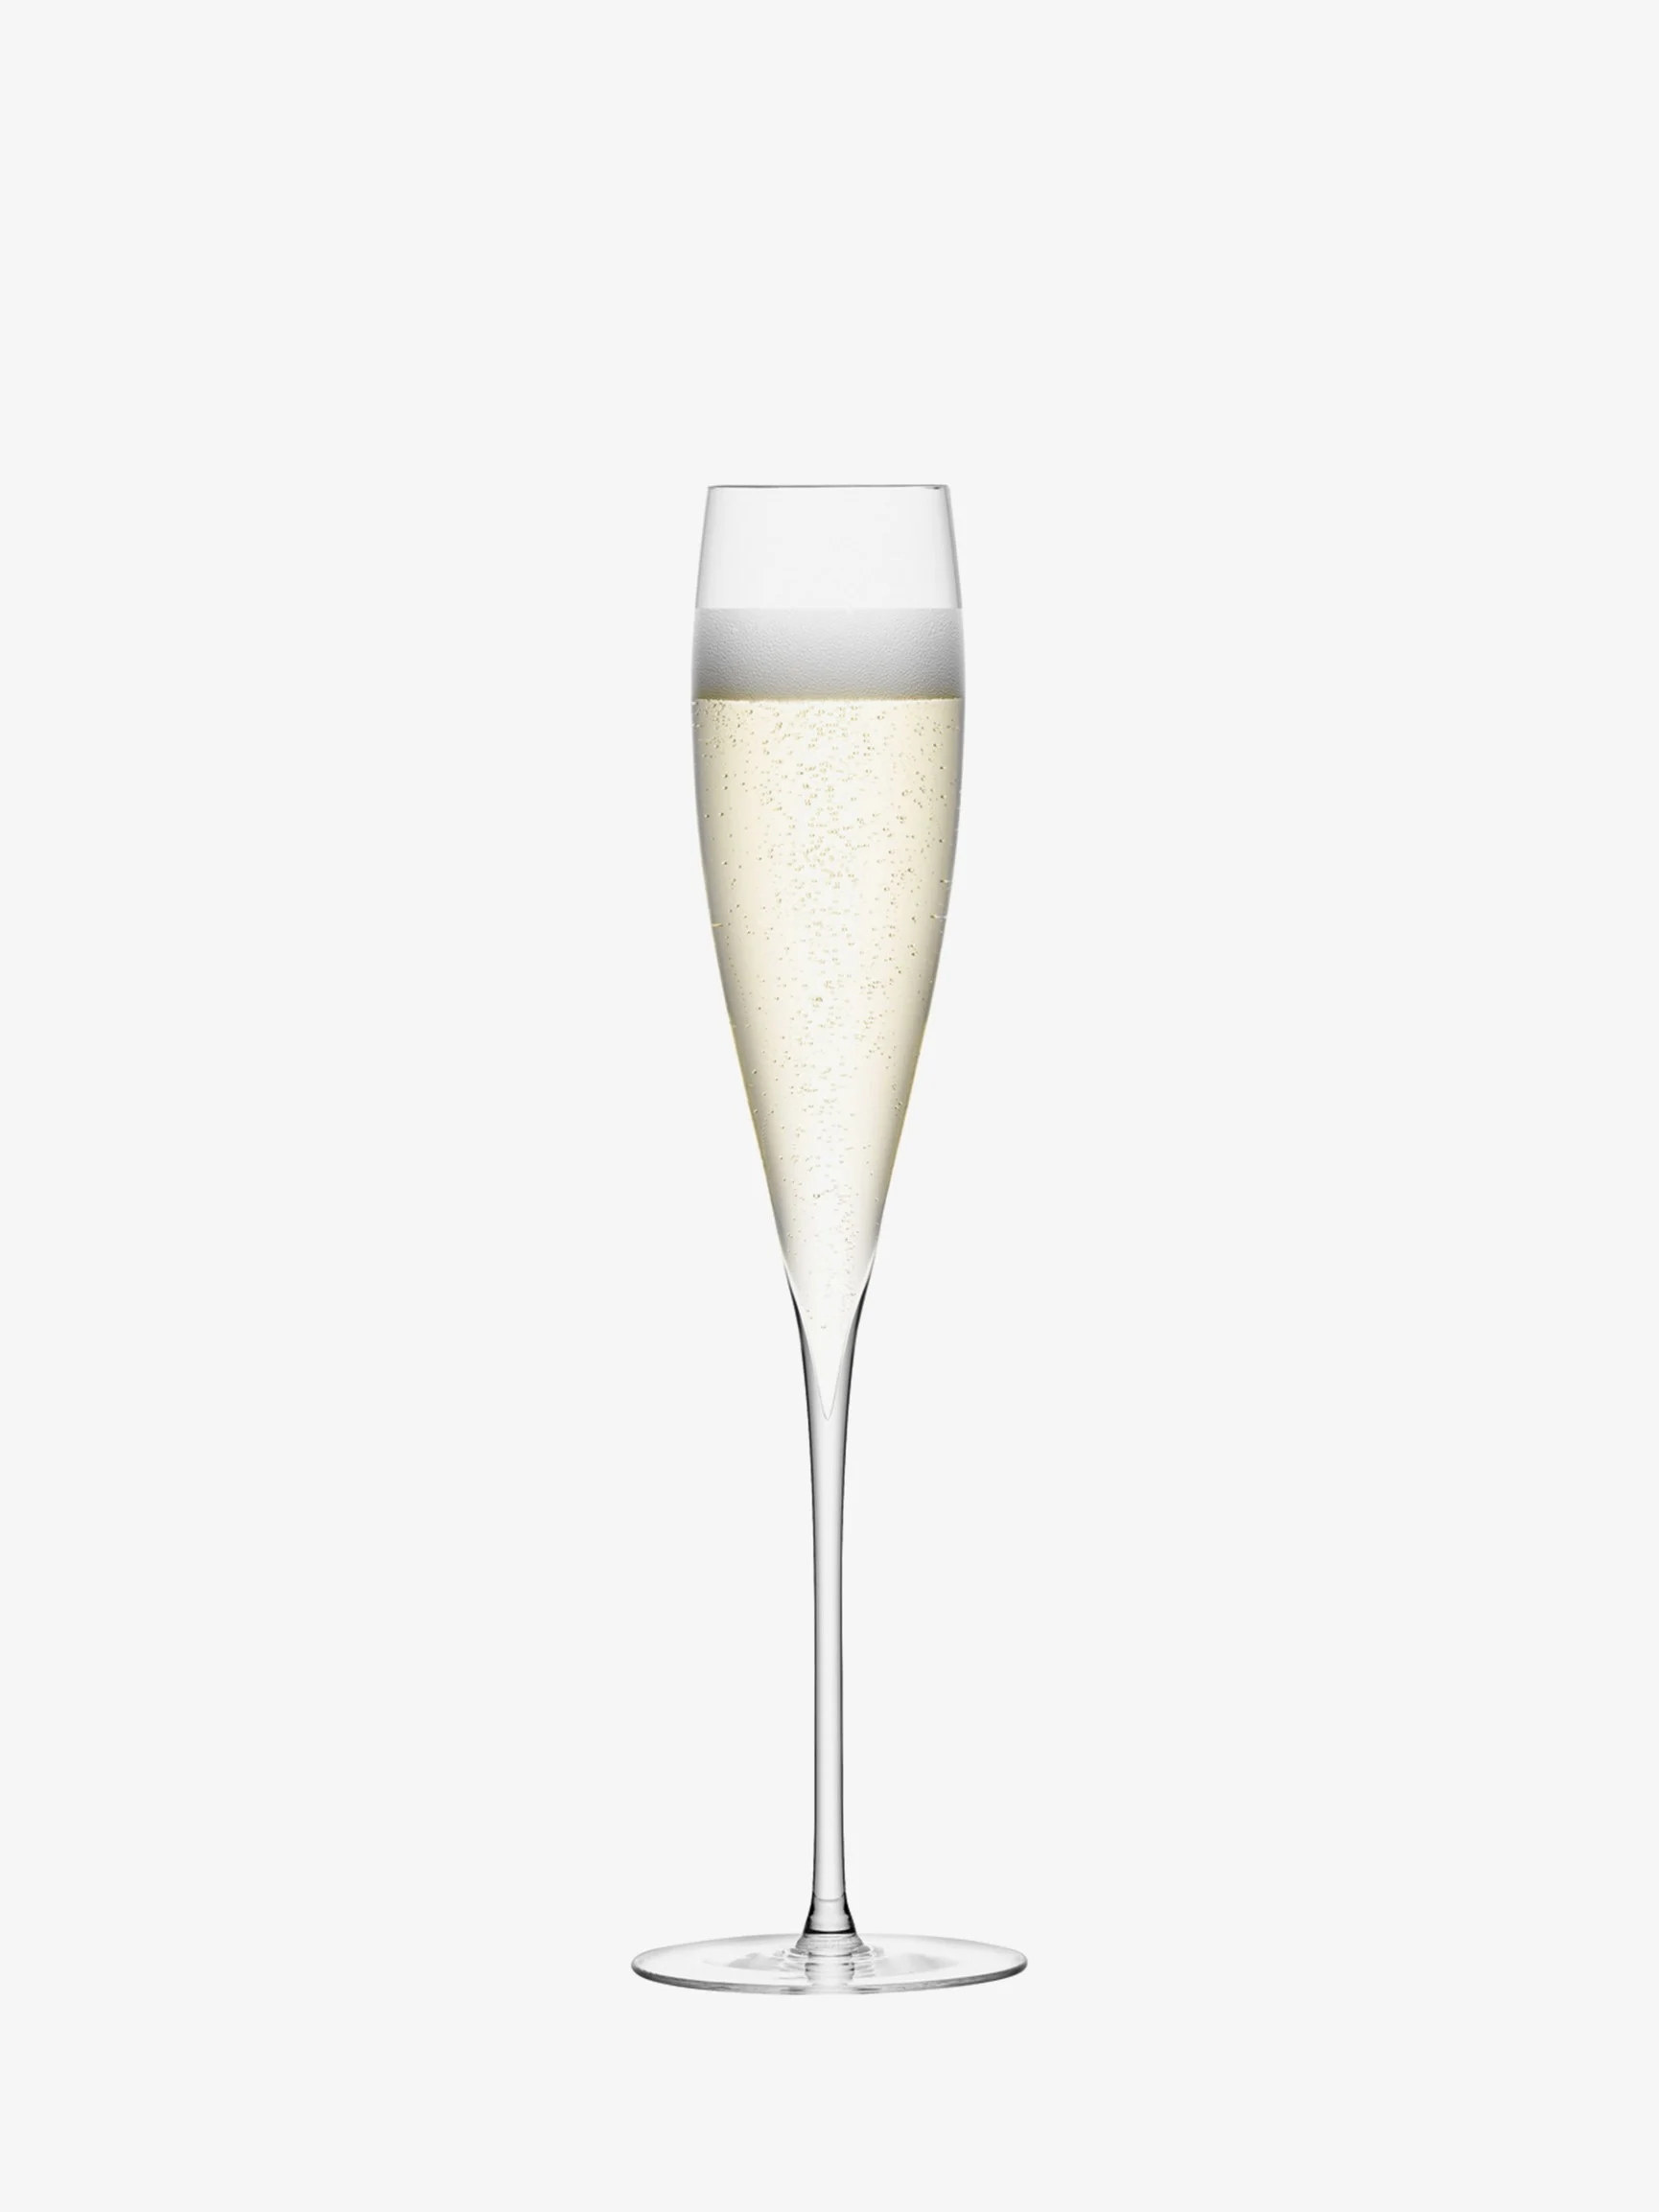 Traditional Flutes Classic Tulip Shape: The iconic tulip-shaped flute is a timeless choice of the champagne